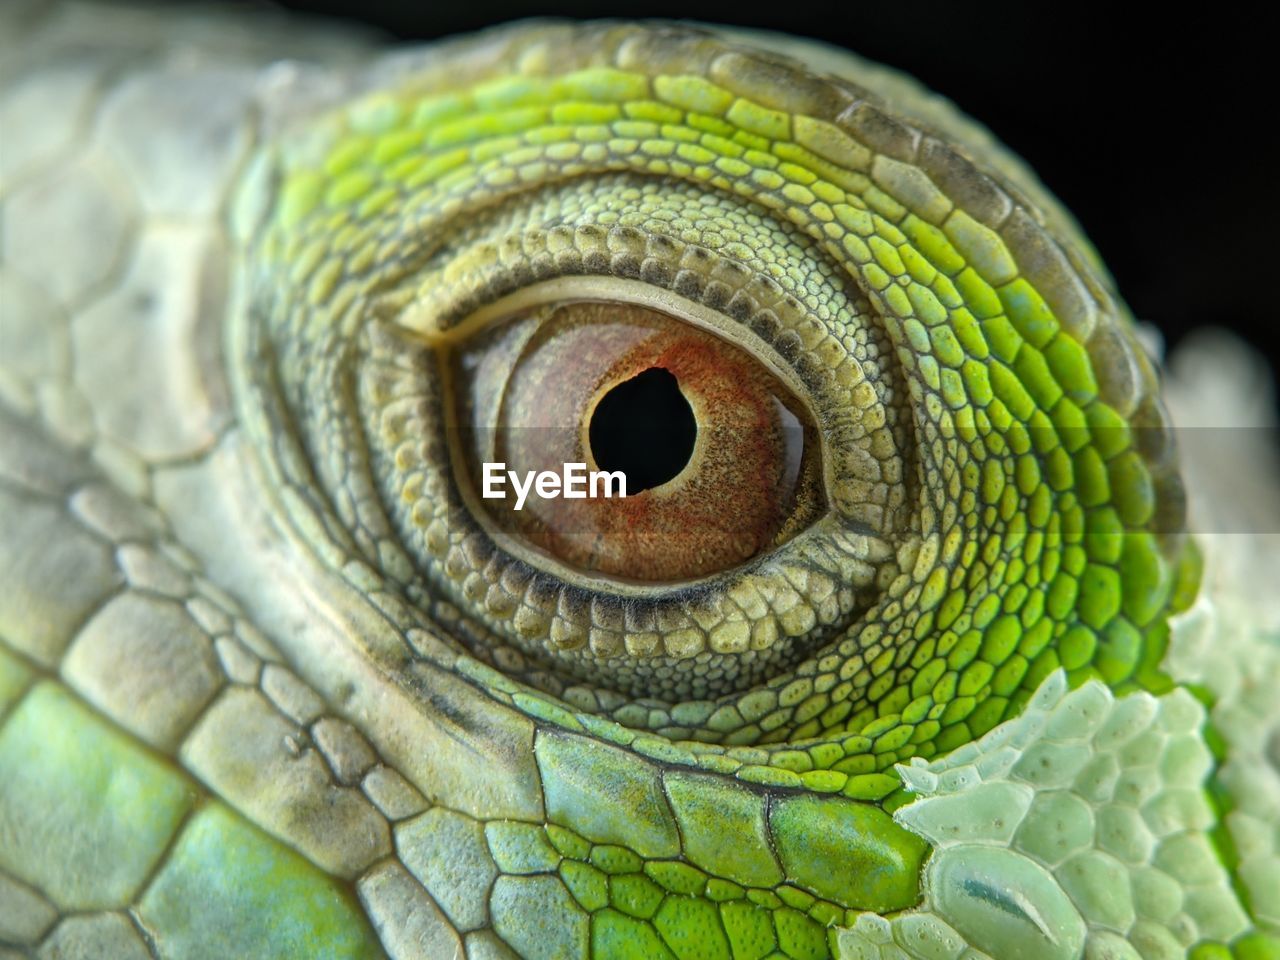 CLOSE-UP OF A REPTILE